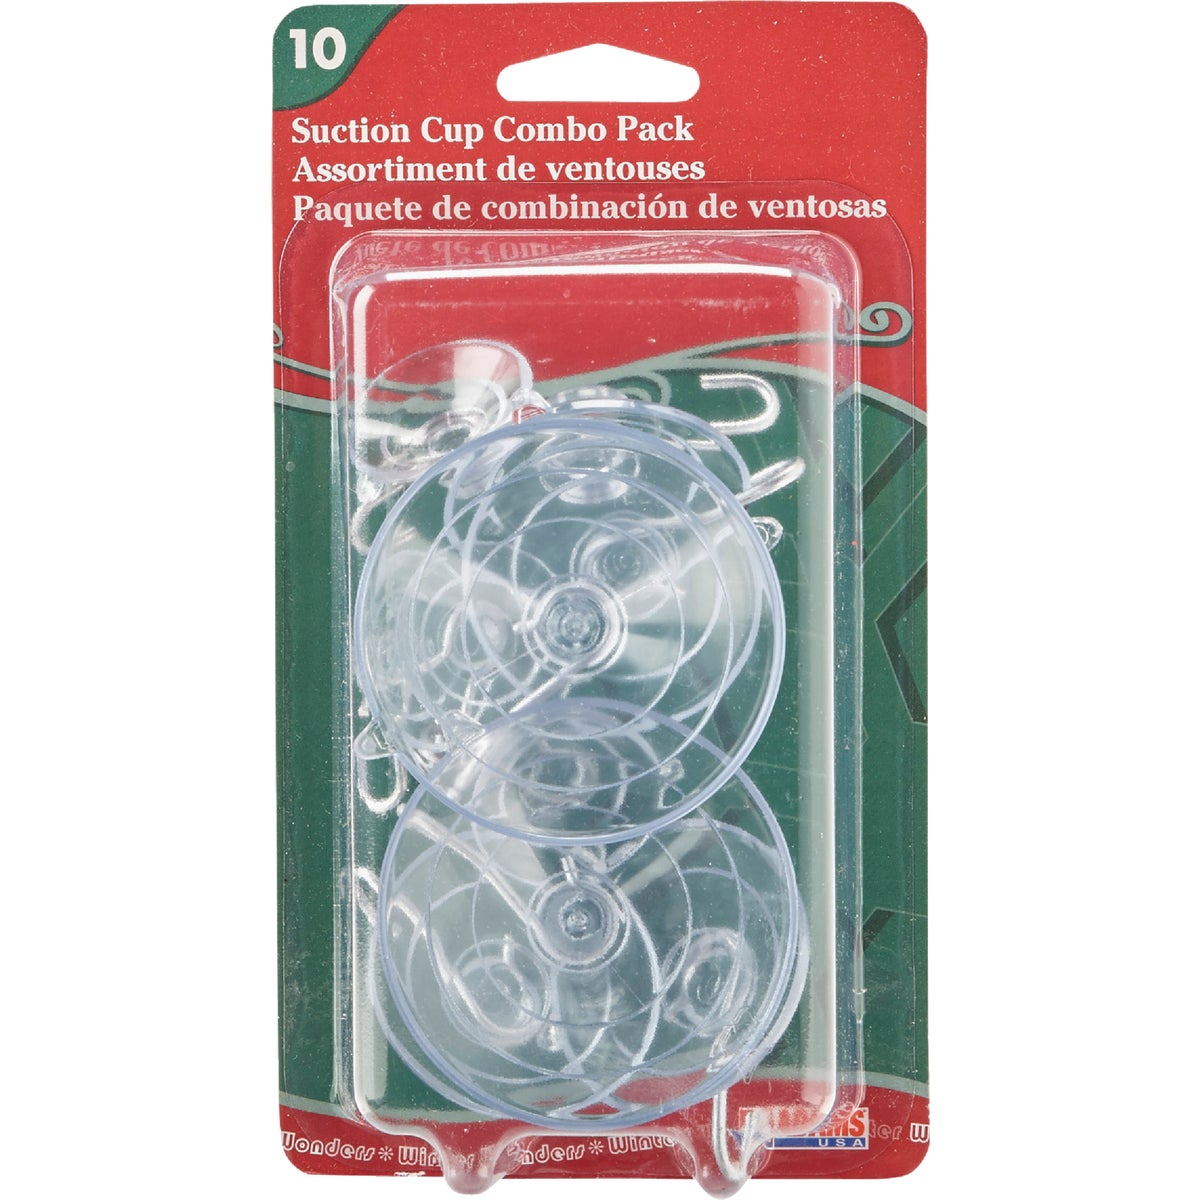 SUCTION CUP COMBO PACK